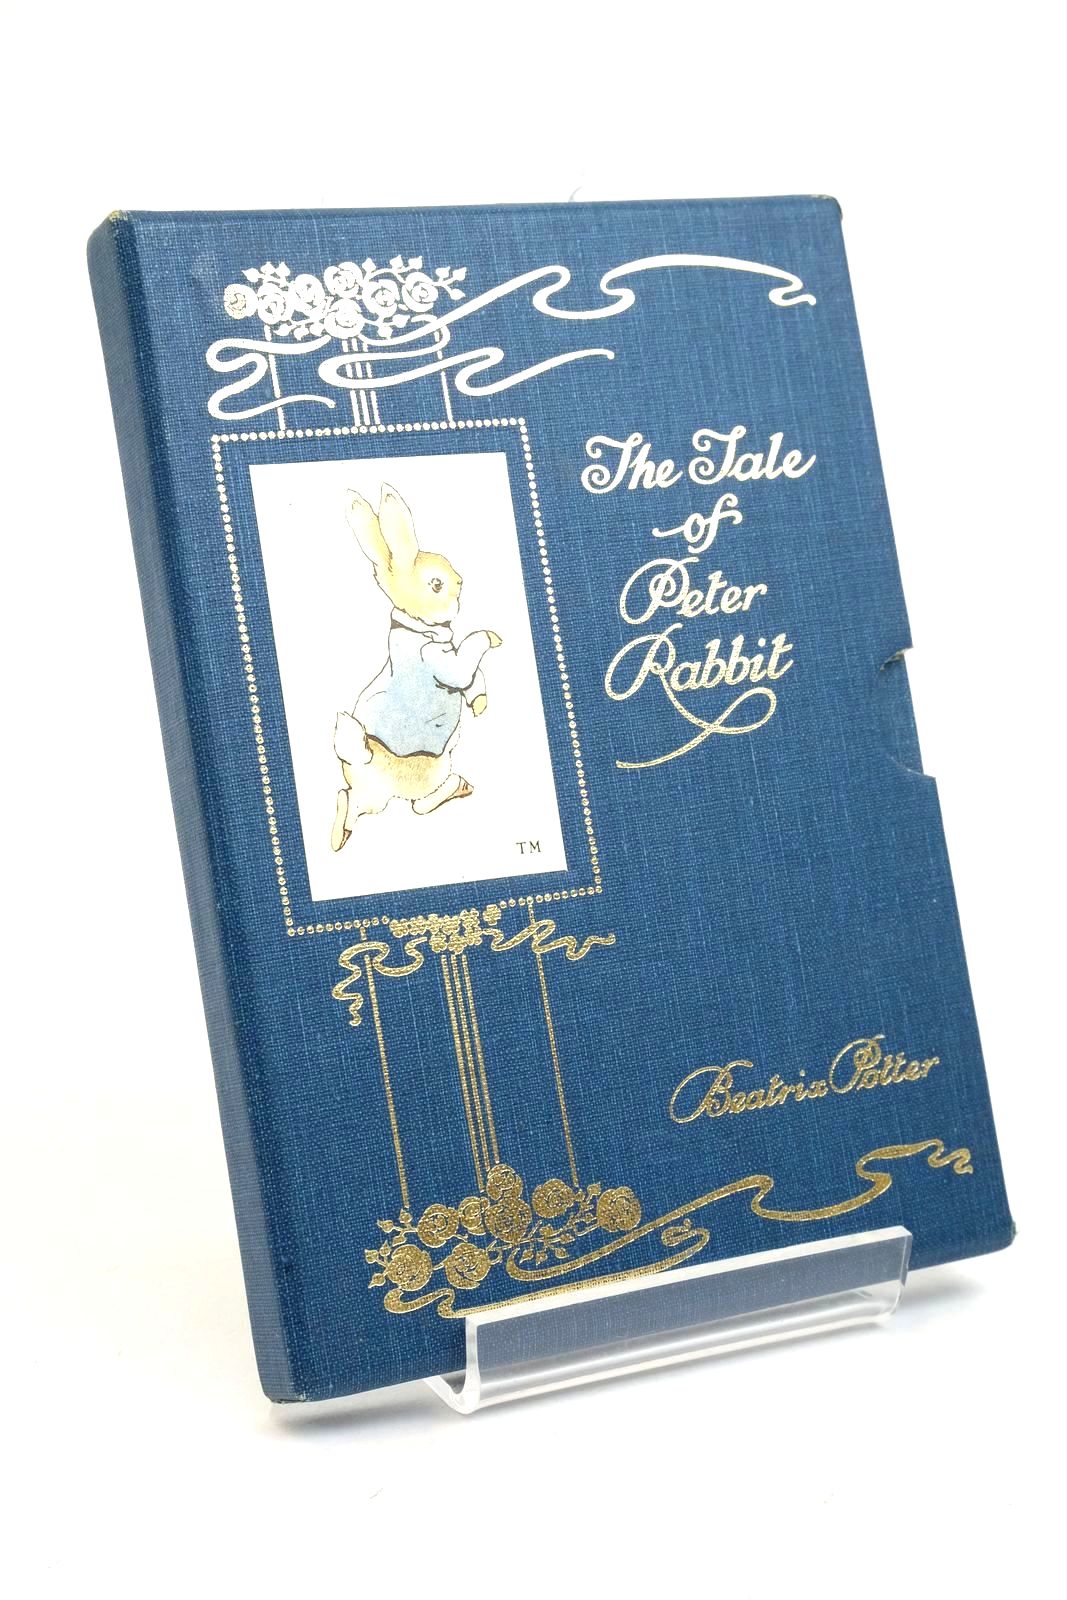 Photo of THE TALE OF PETER RABBIT written by Potter, Beatrix illustrated by Potter, Beatrix published by Frederick Warne (STOCK CODE: 1322406)  for sale by Stella & Rose's Books